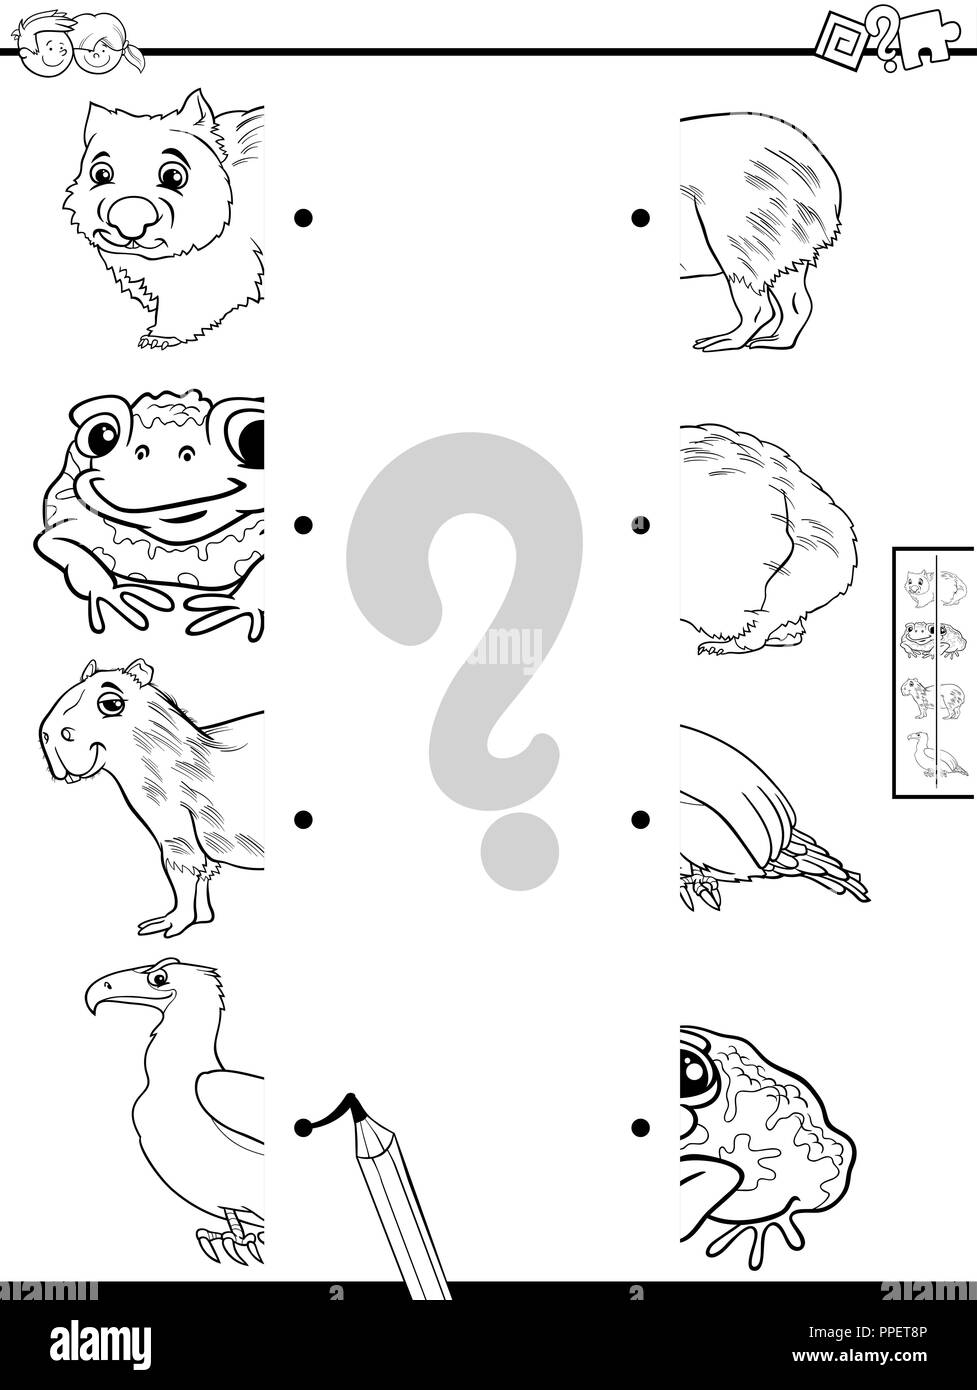 Black and White Cartoon Illustration of Educational Game of Matching Halves of Pictures with Animals Coloring Book Stock Vector